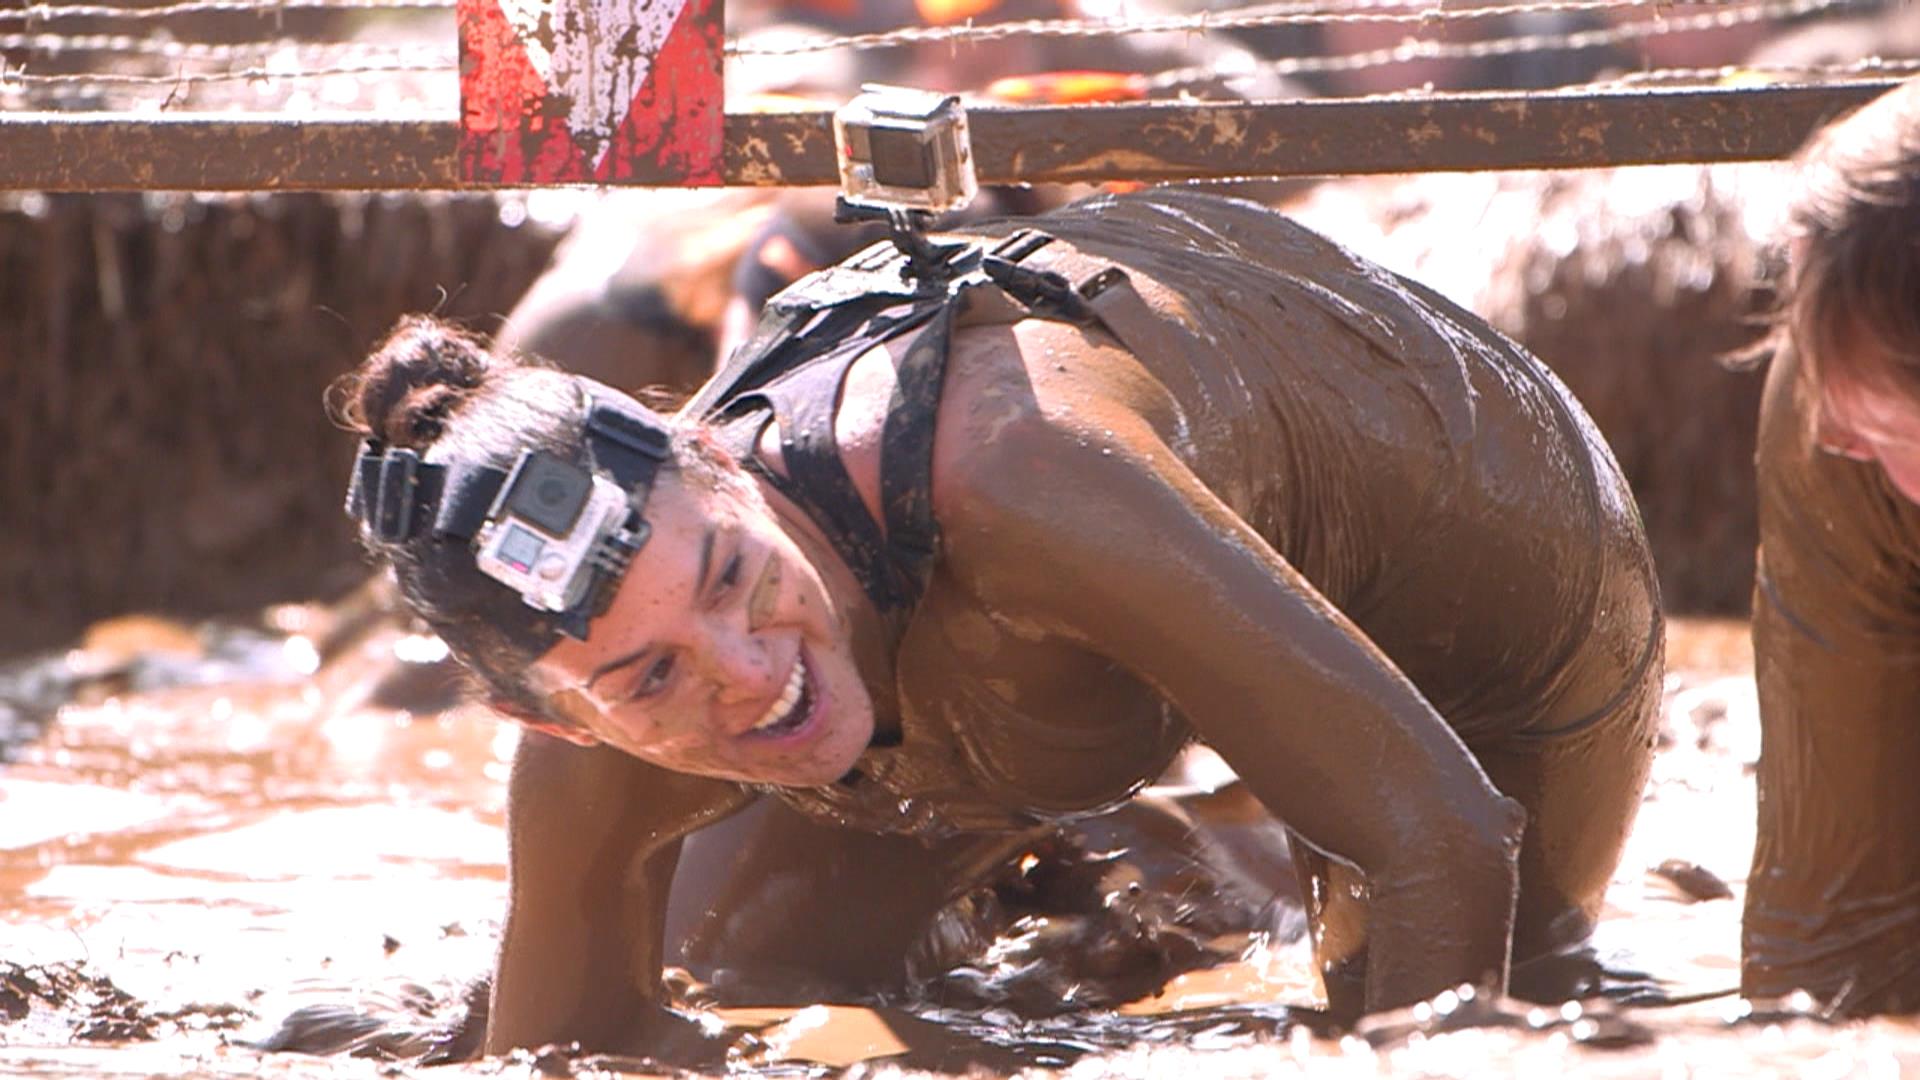 Watch TODAY’s Donnadorable tackle the Tough Mudder obstacle course - TODAY.com